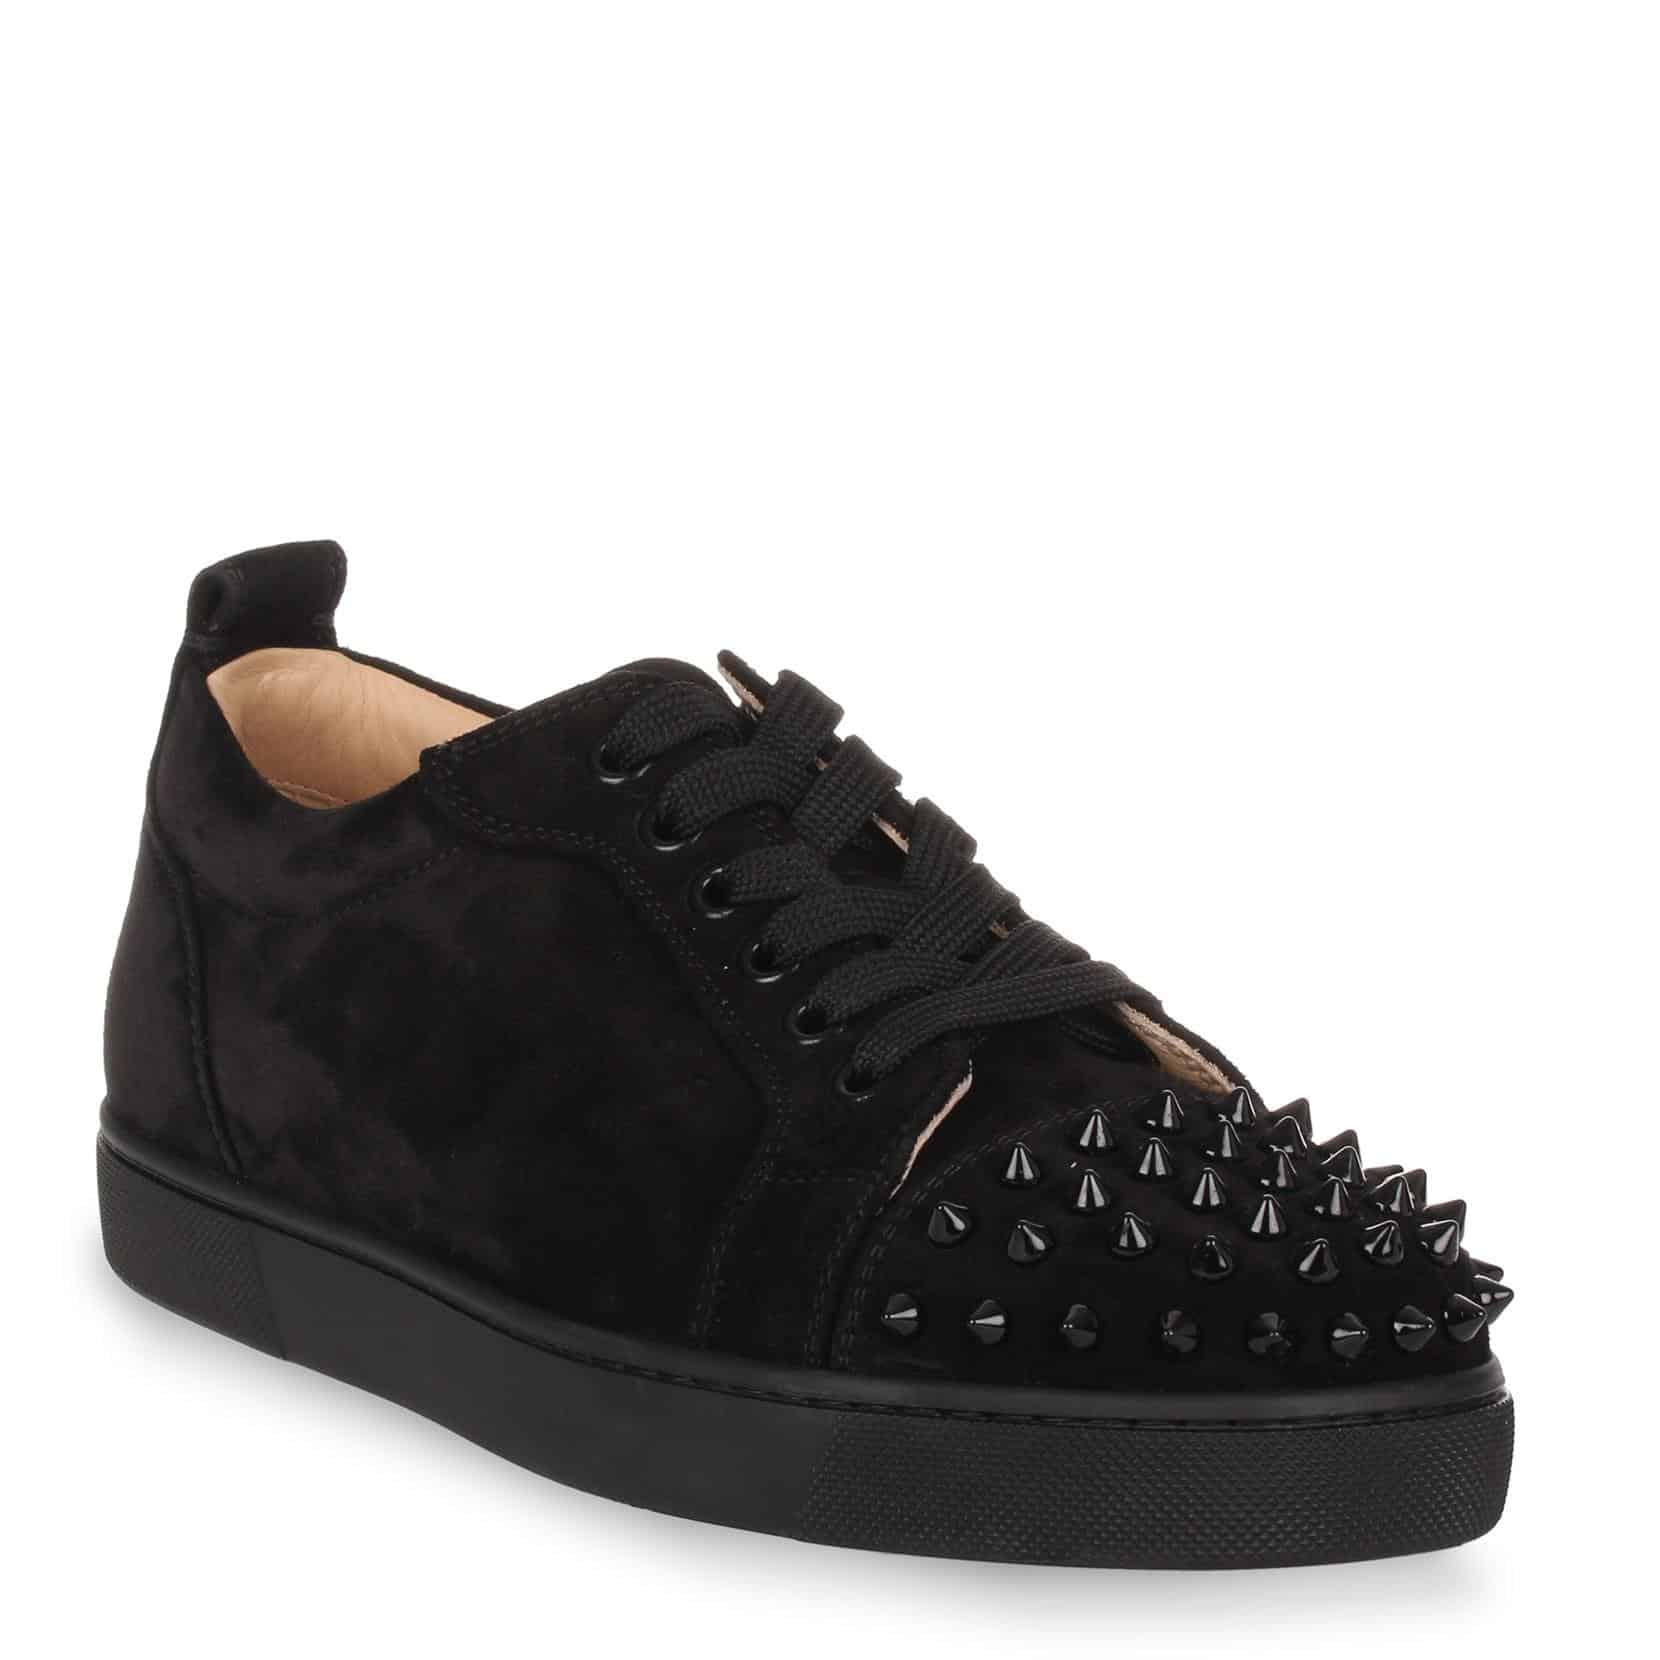 Christian Louboutin Louis Junior Spiked Suede Sneakers in Black